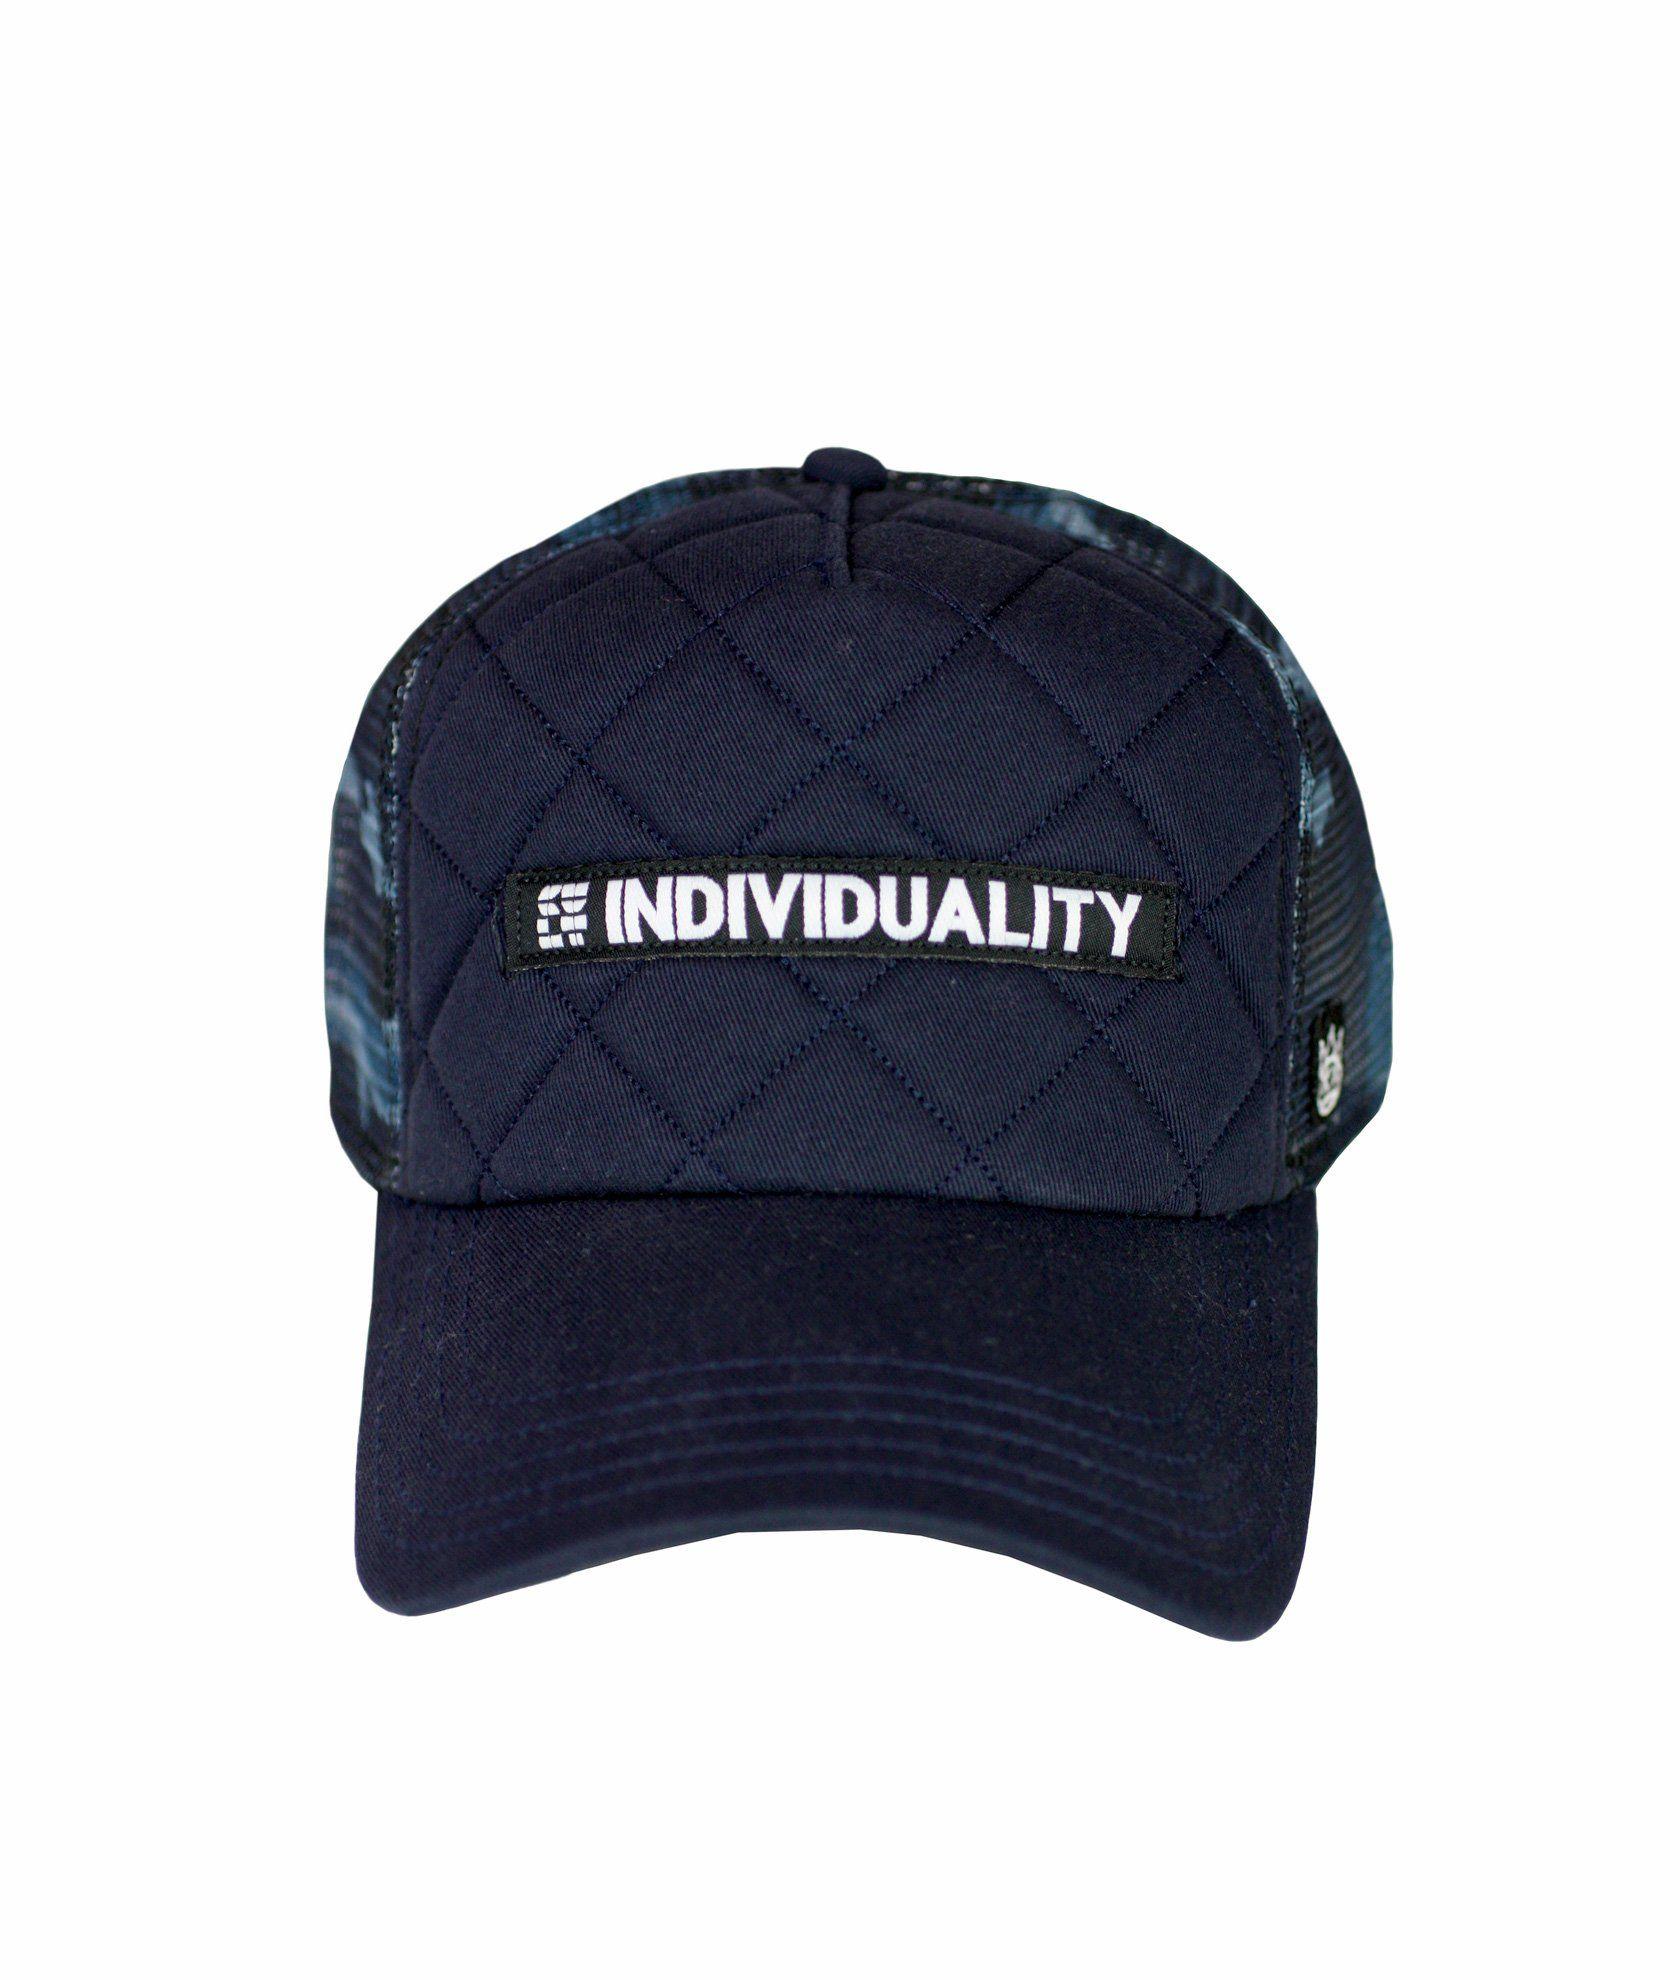 Camo Country Boy Logo - Cult Of Individuality MenQuilted Foam Logo Trucker Hat In Navy Camo Mesh